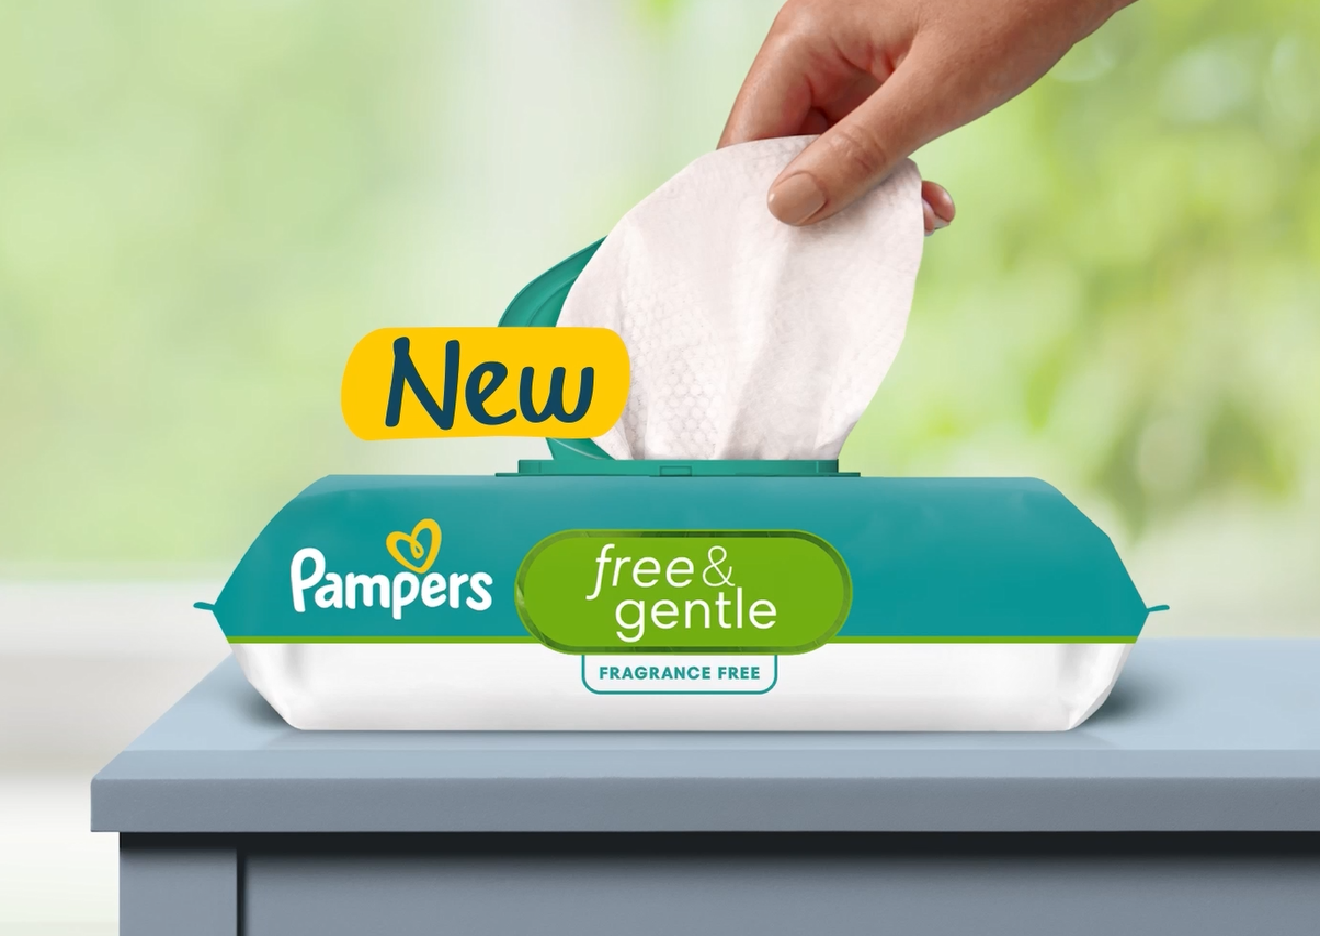 Pampers Free & Gentle Wipes clean better* without risk of tearing